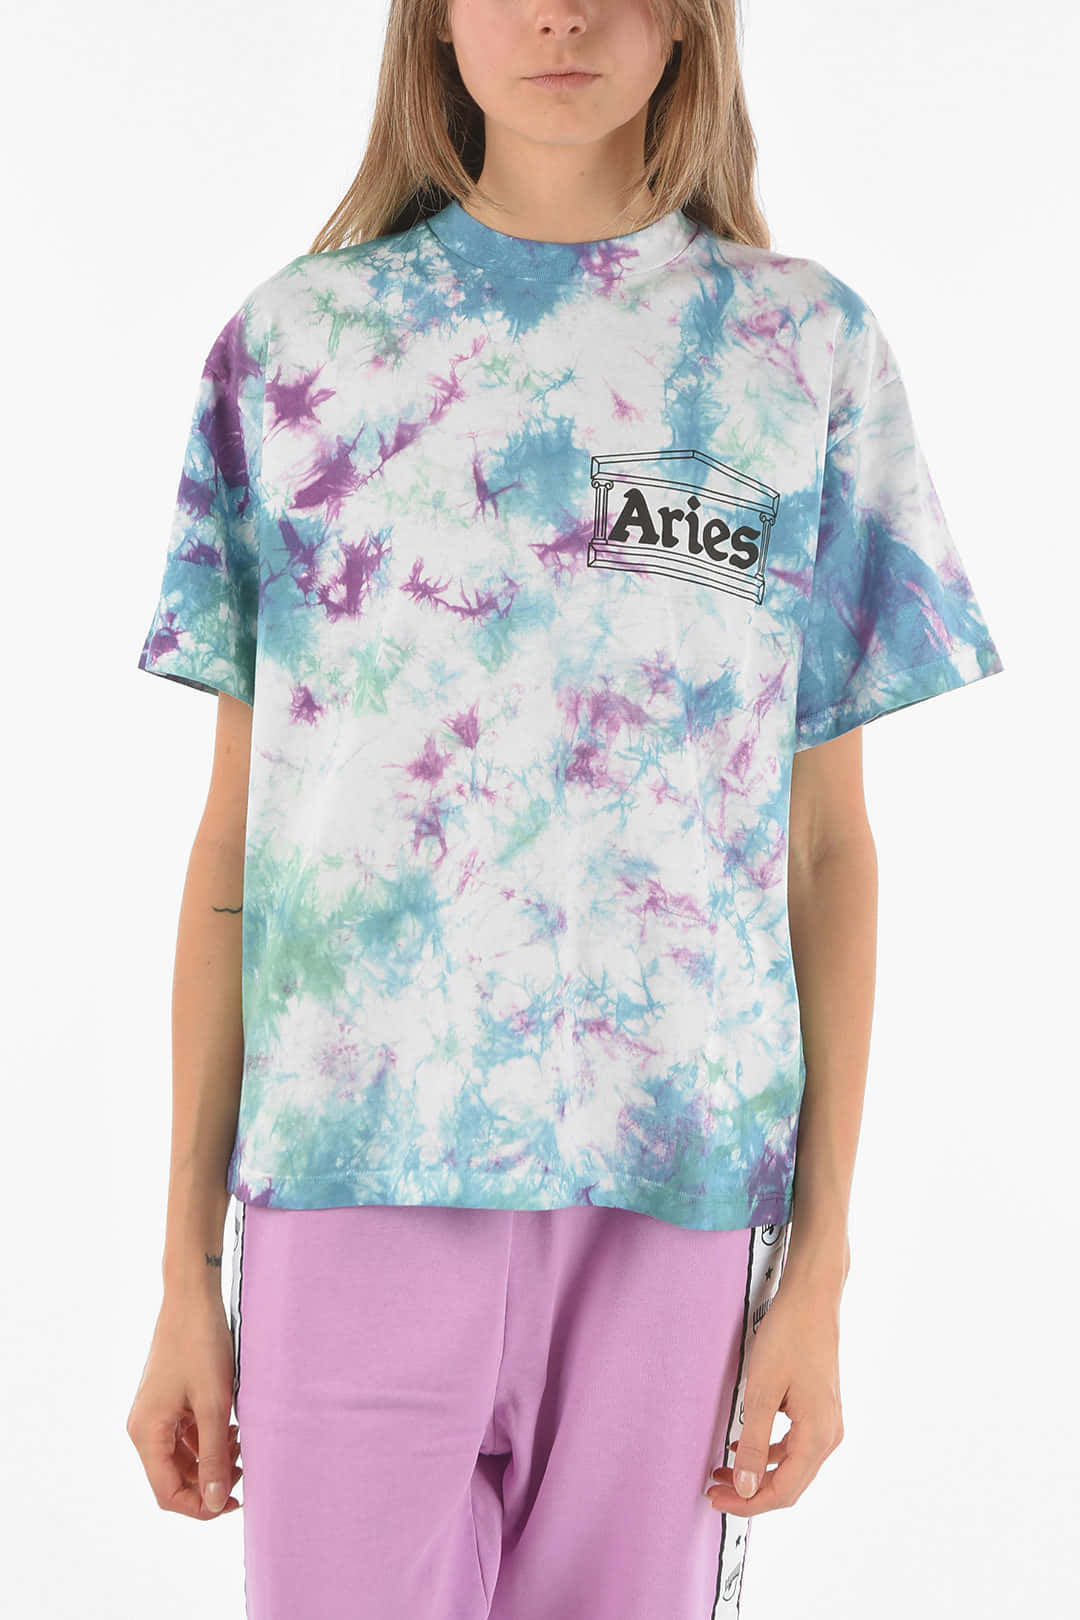 Spruce Up your Wardrobe with Fun and Vibrant Tie Dye!